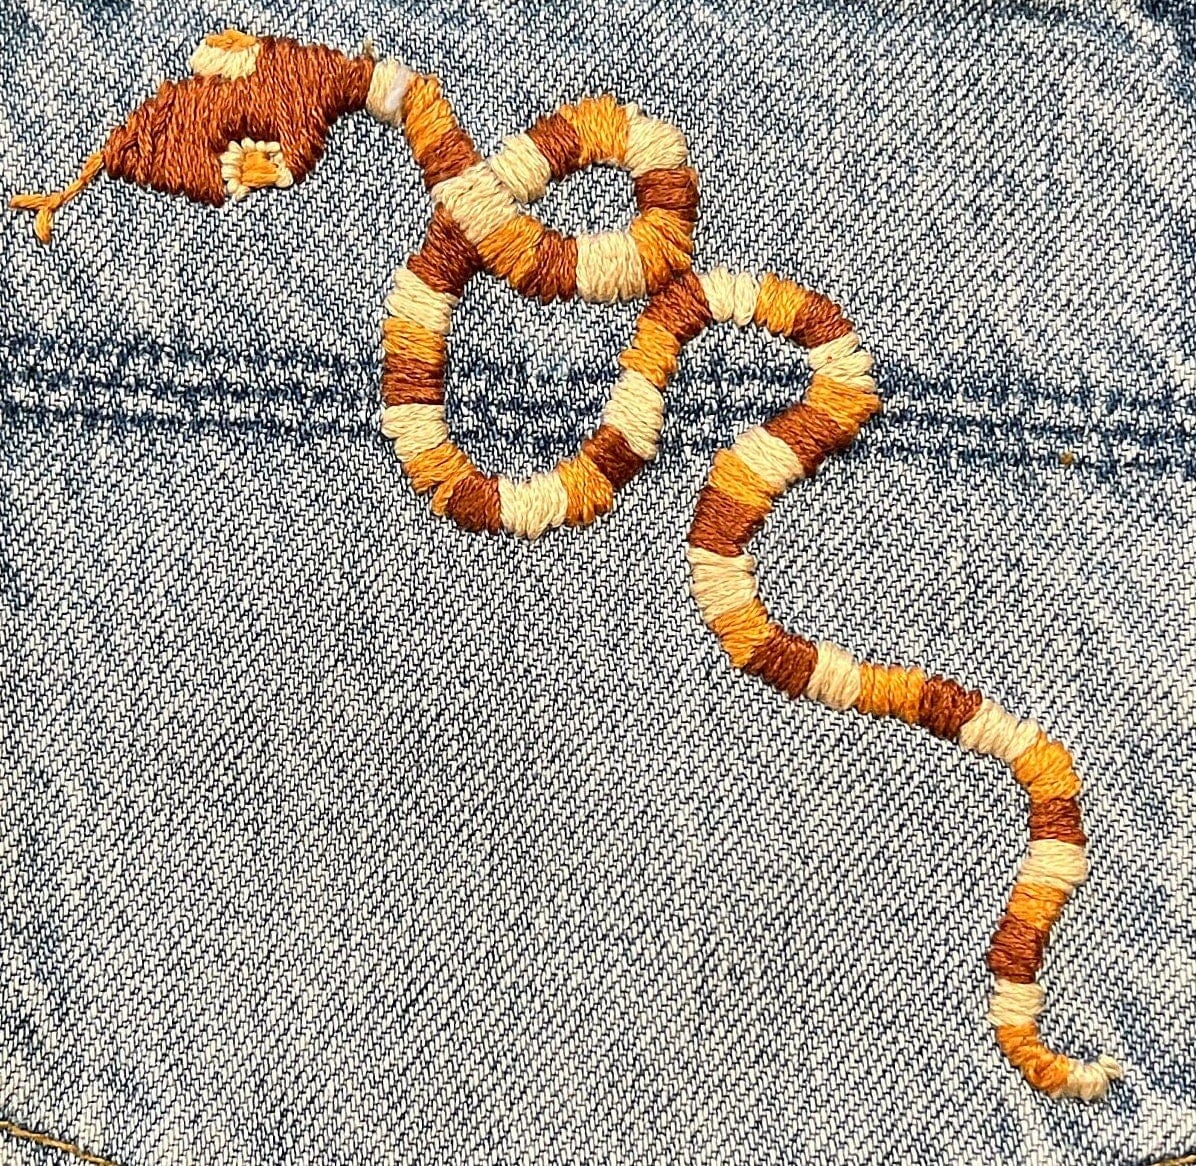 SNAKE HOT POCKET 3 color Hand Embroidered Stitched gold Denim Hippie Pocket 6 X 6 Appliques & Patches